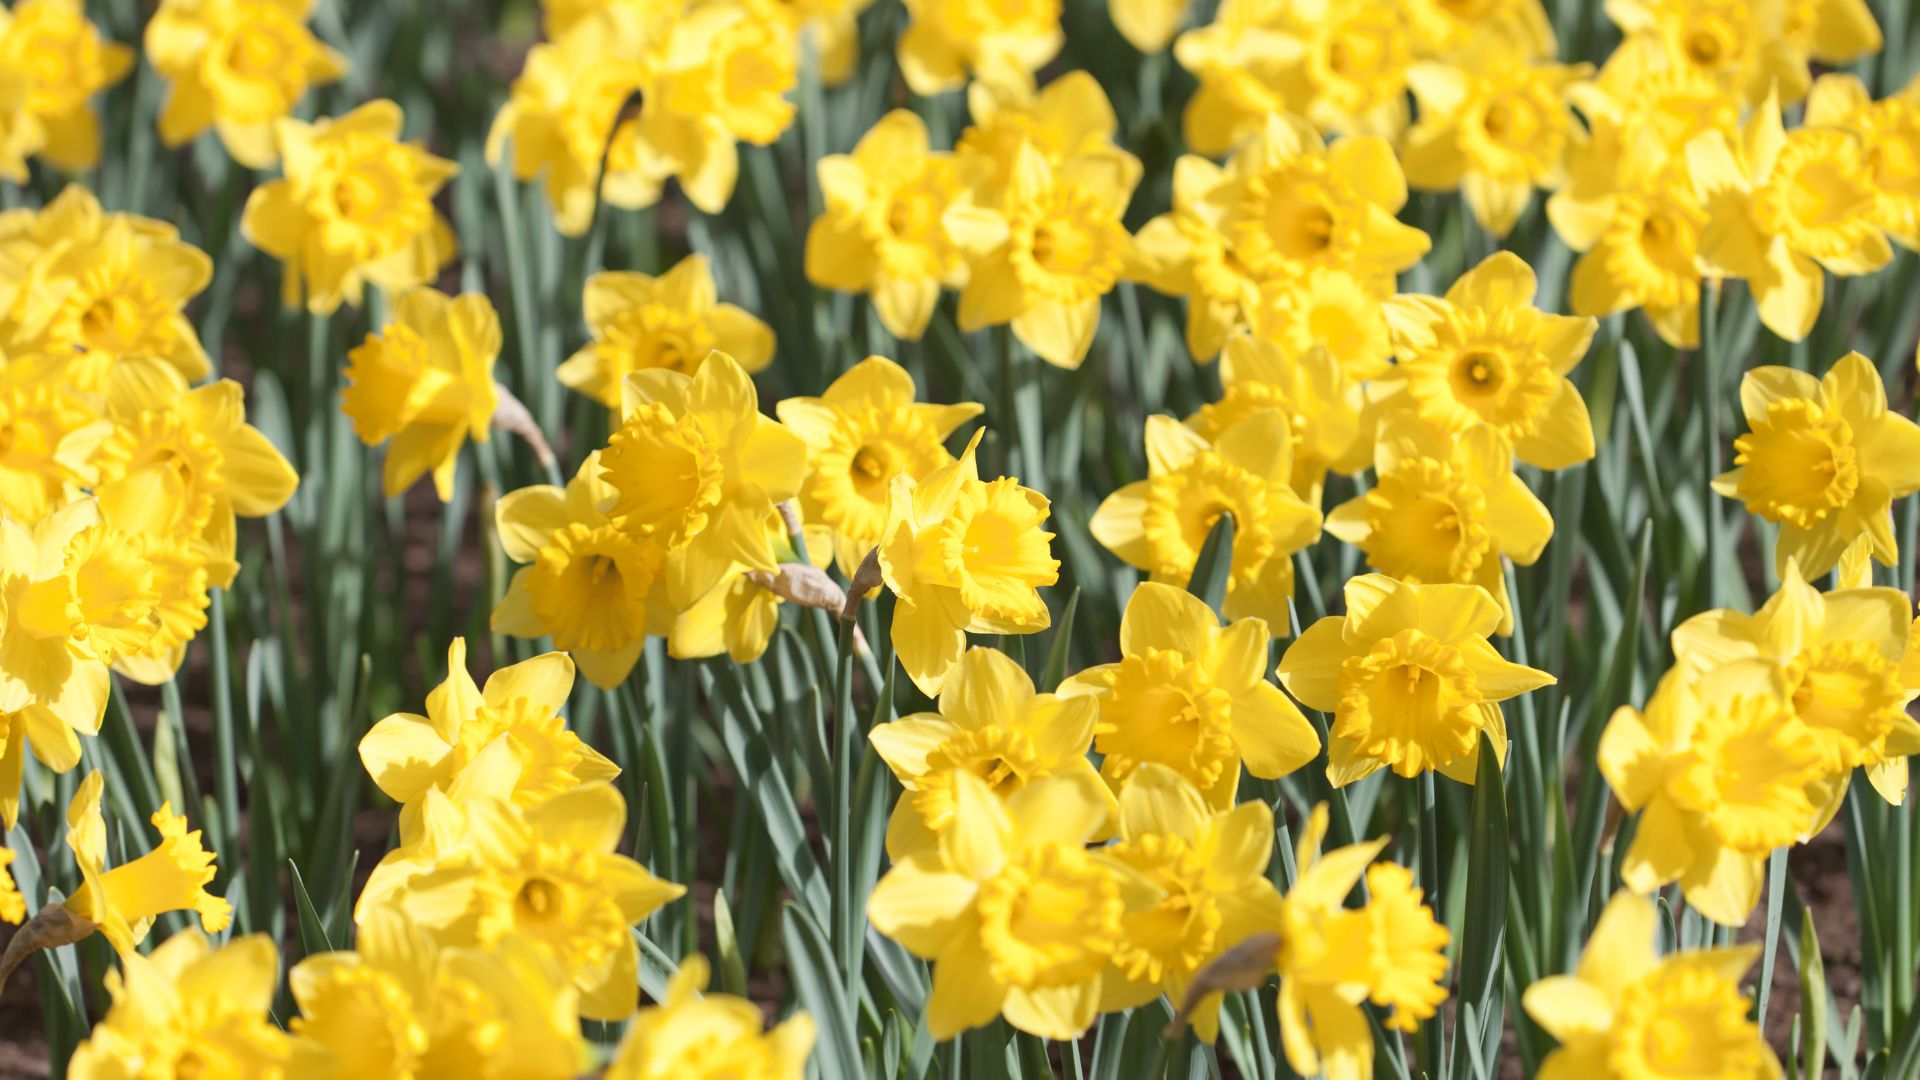 5 Helpful Tips For Growing Daffodils In Winter